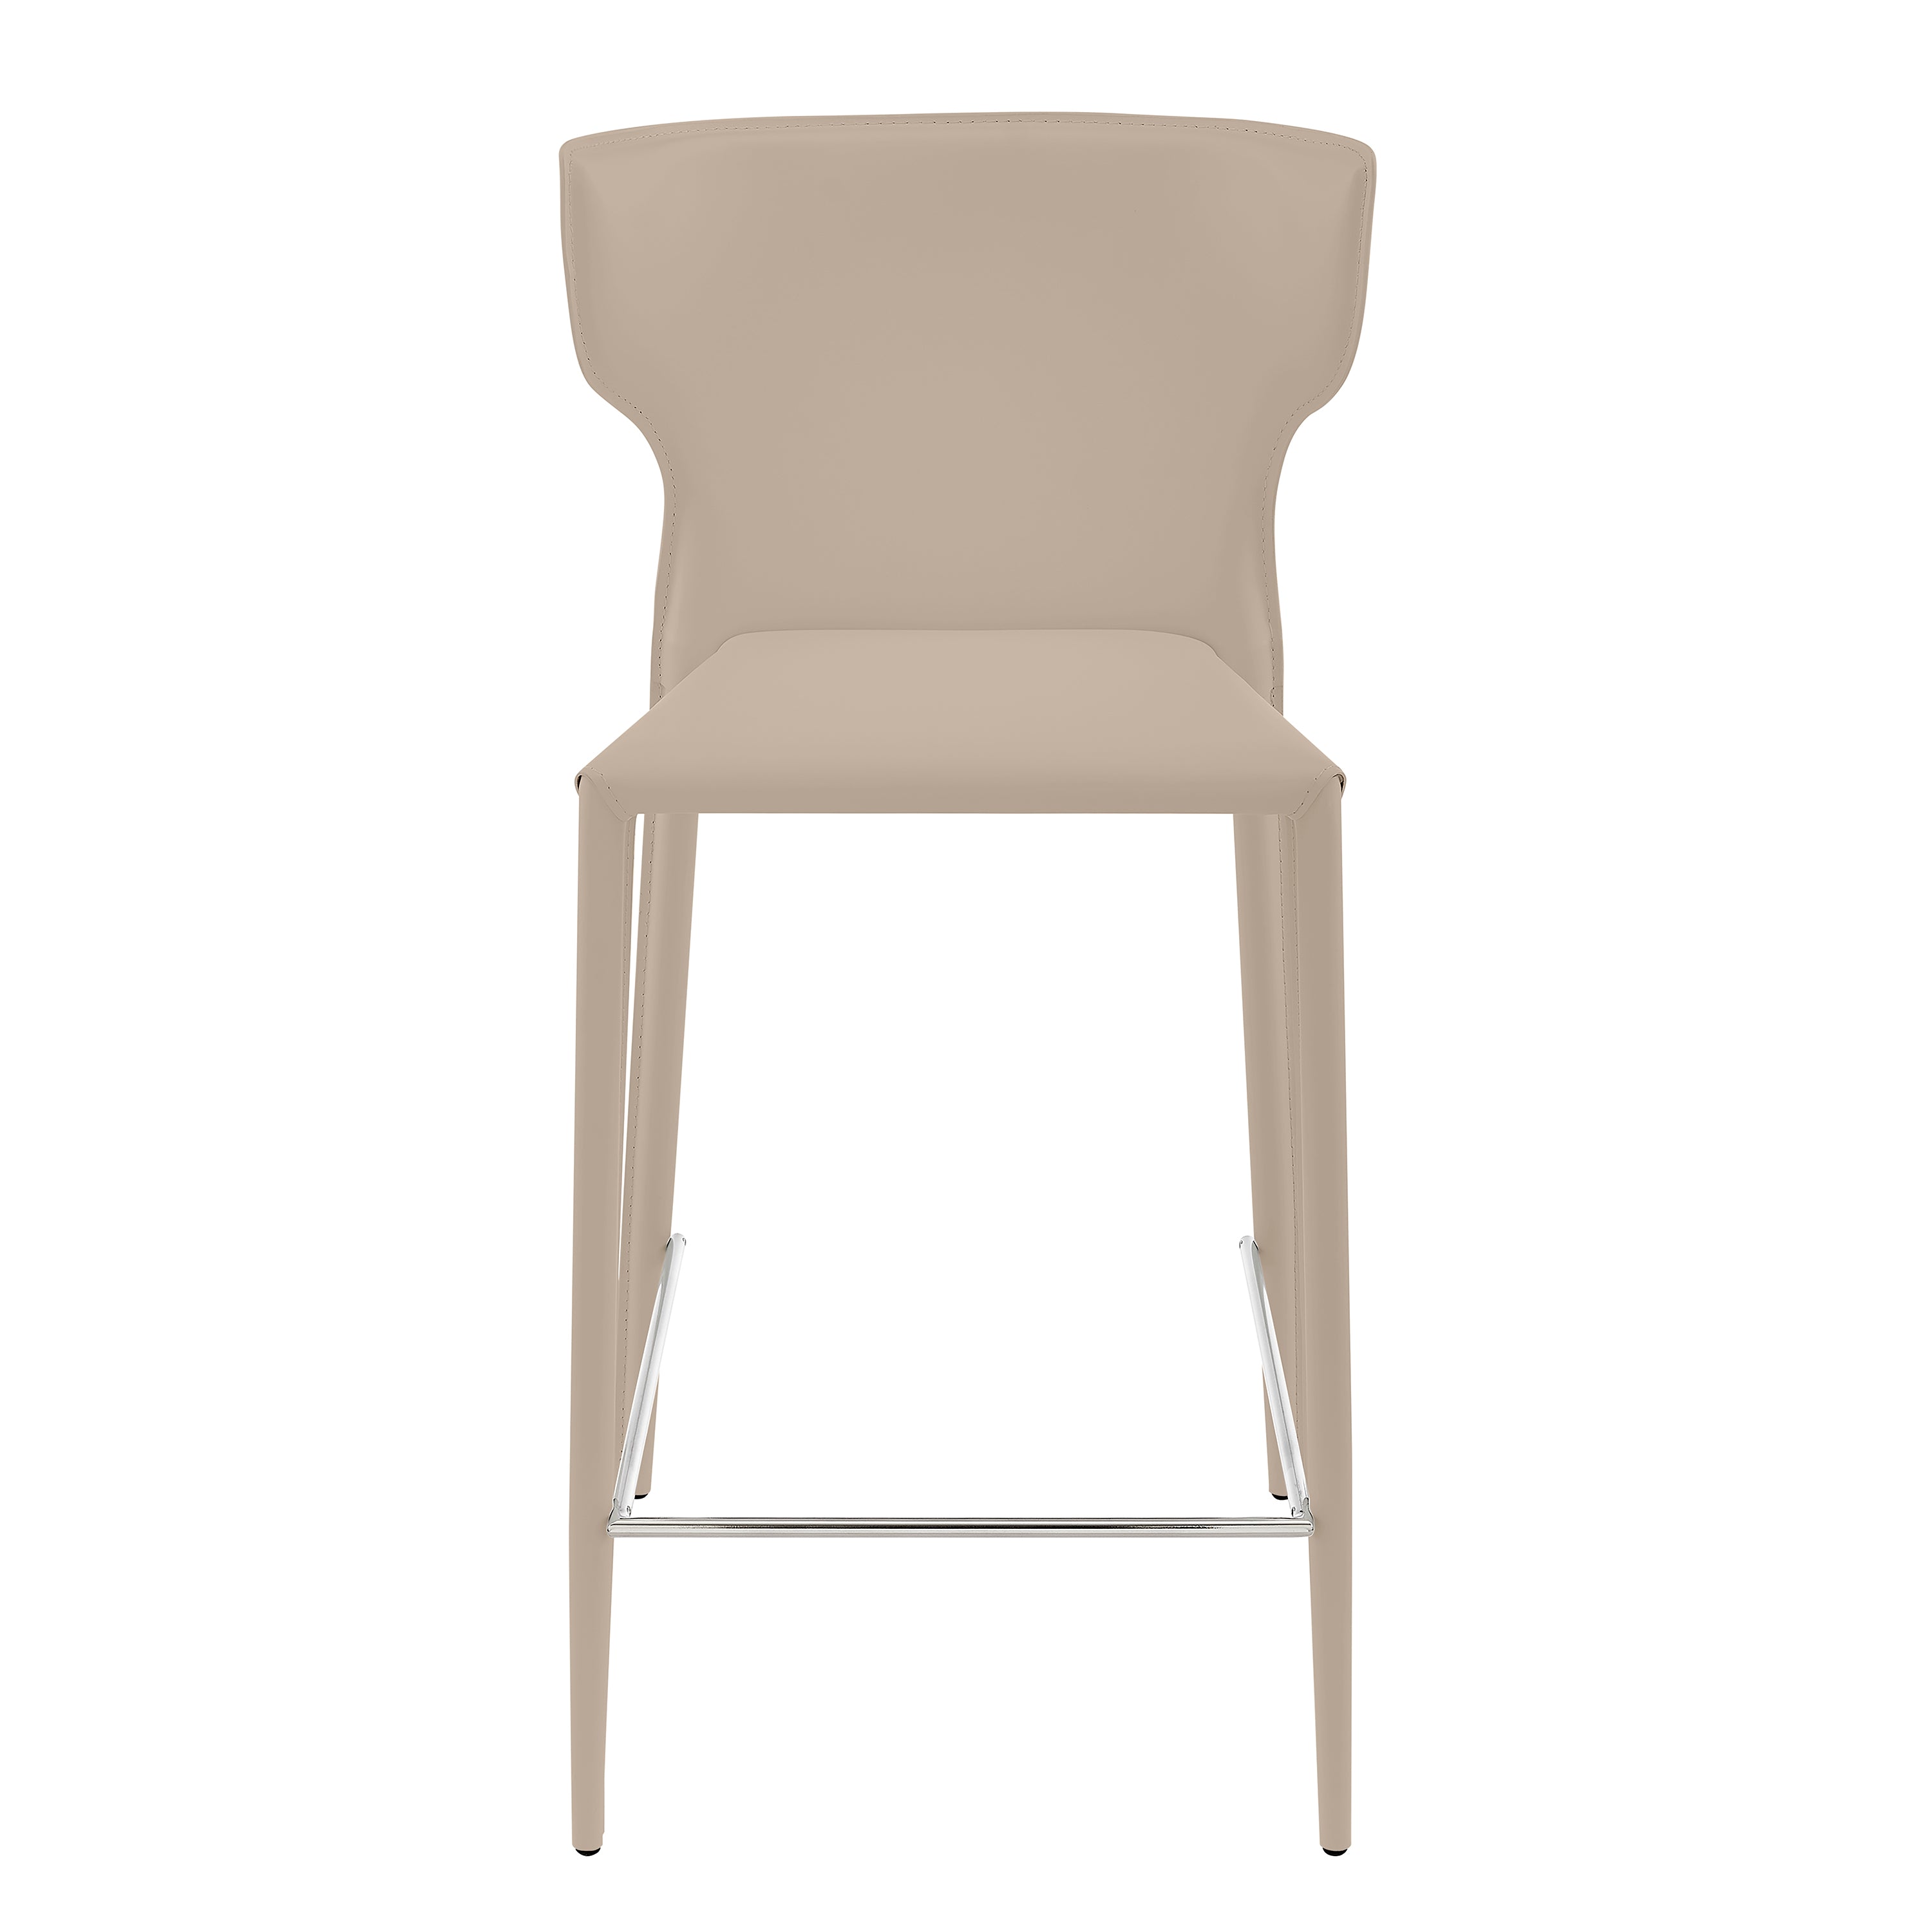 Euro Style Barstools - Divinia Counter Stool in Light Gray - Set of 2